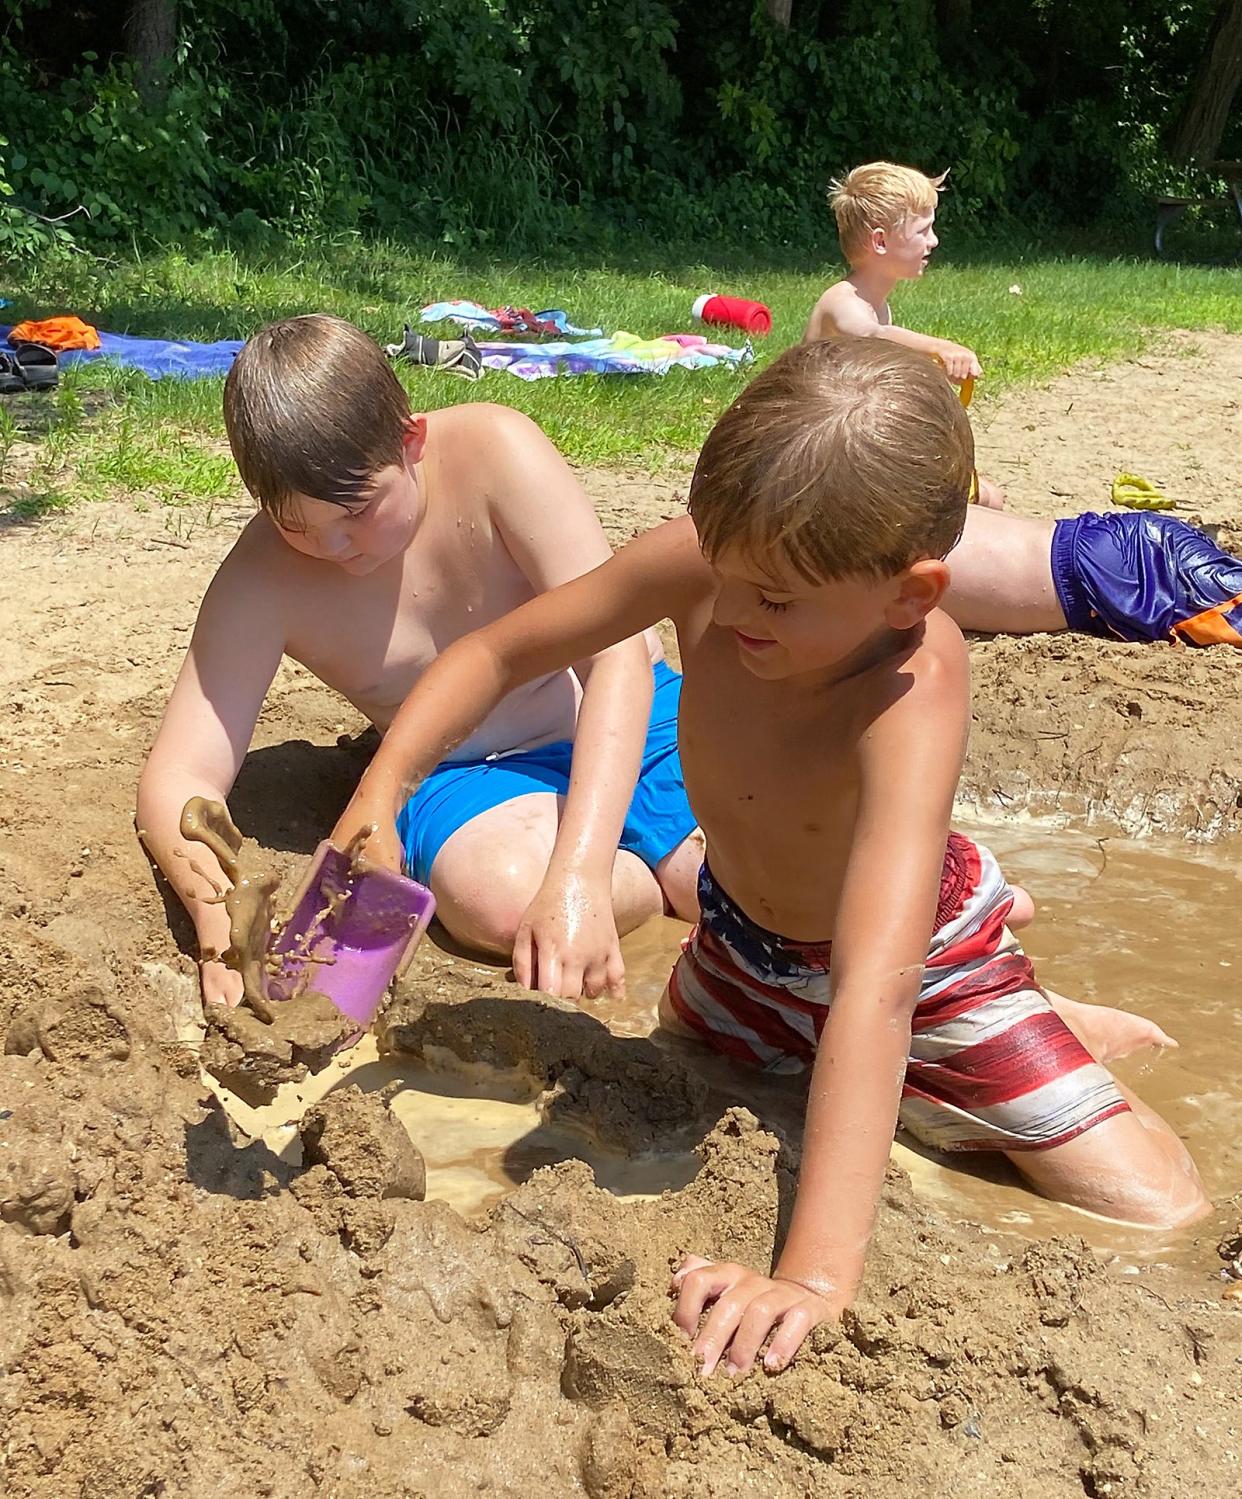 Making sand castles always is fun at Camp Fort Hill's day camp.